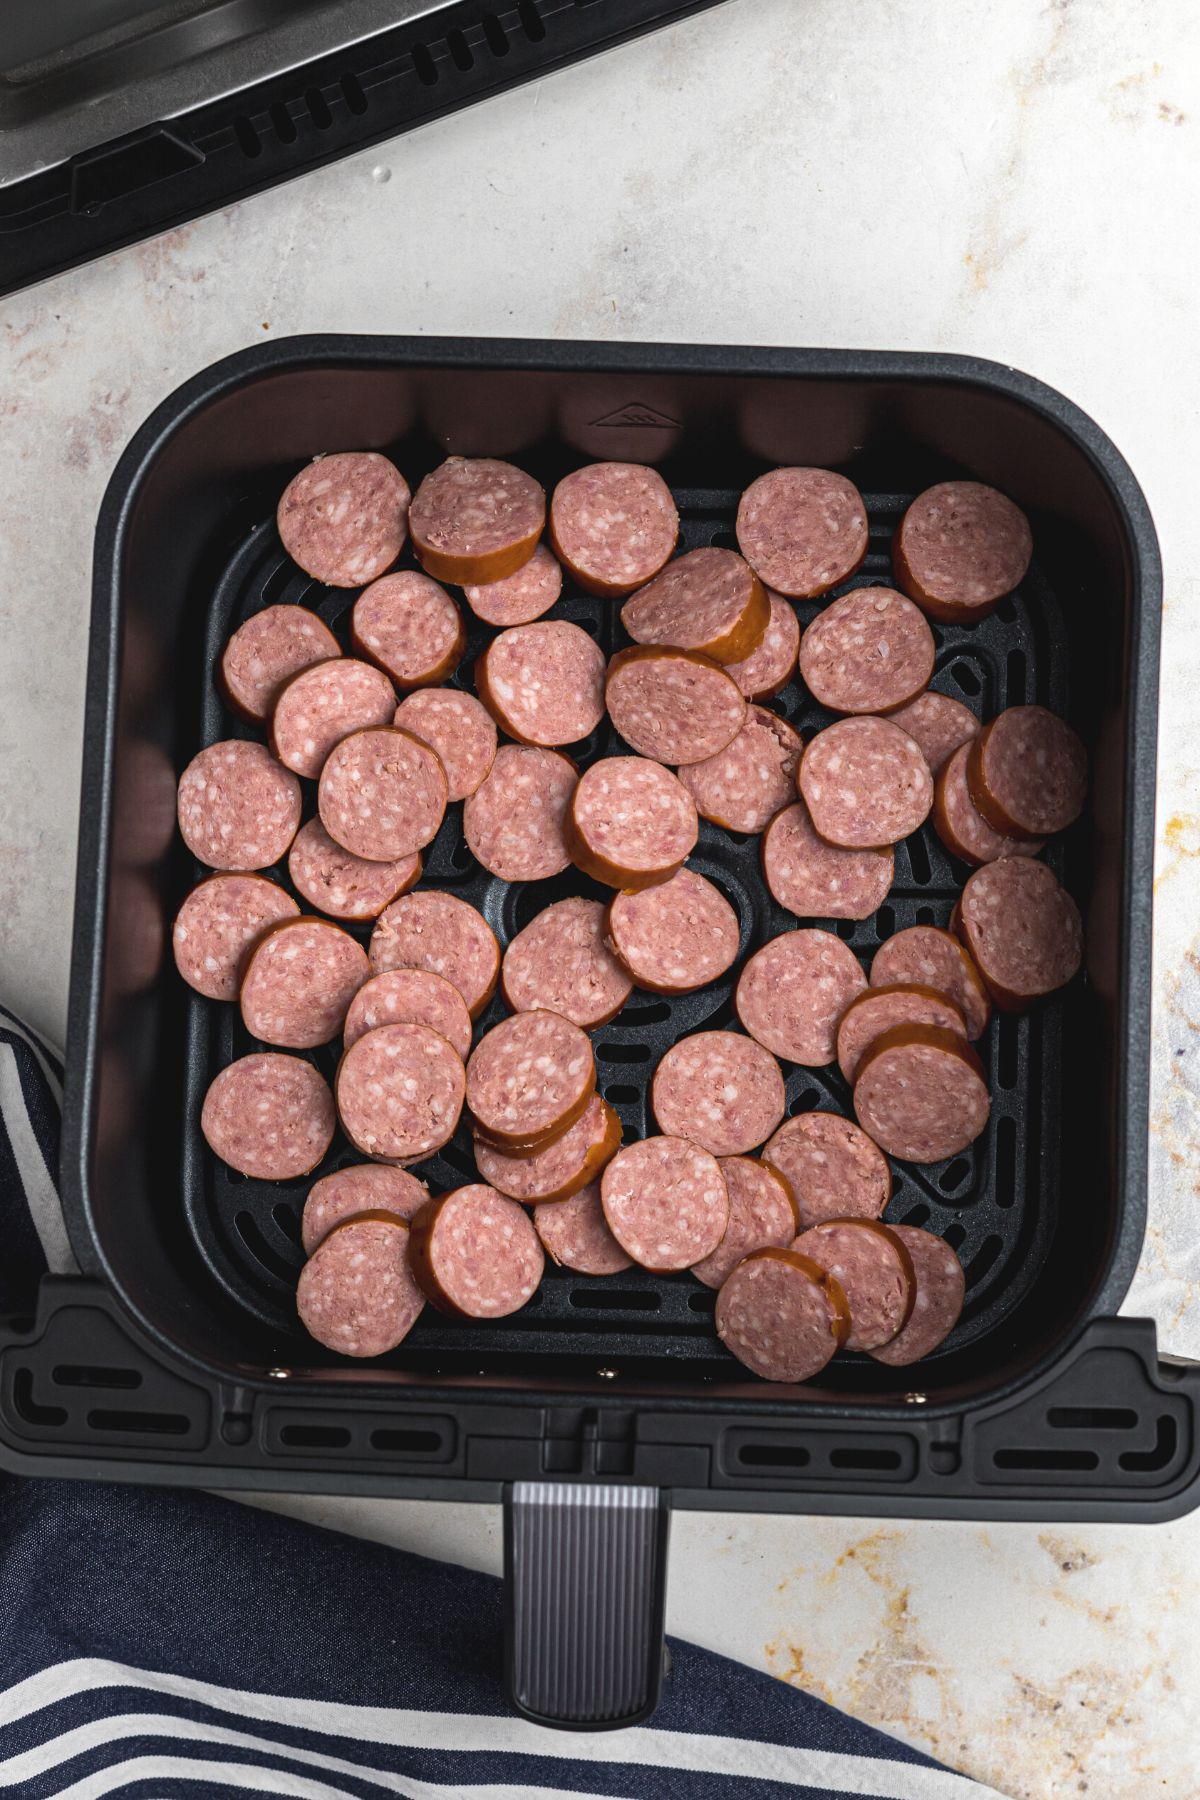 Kielbasa cut into slices in the air fryer basket before being cooked